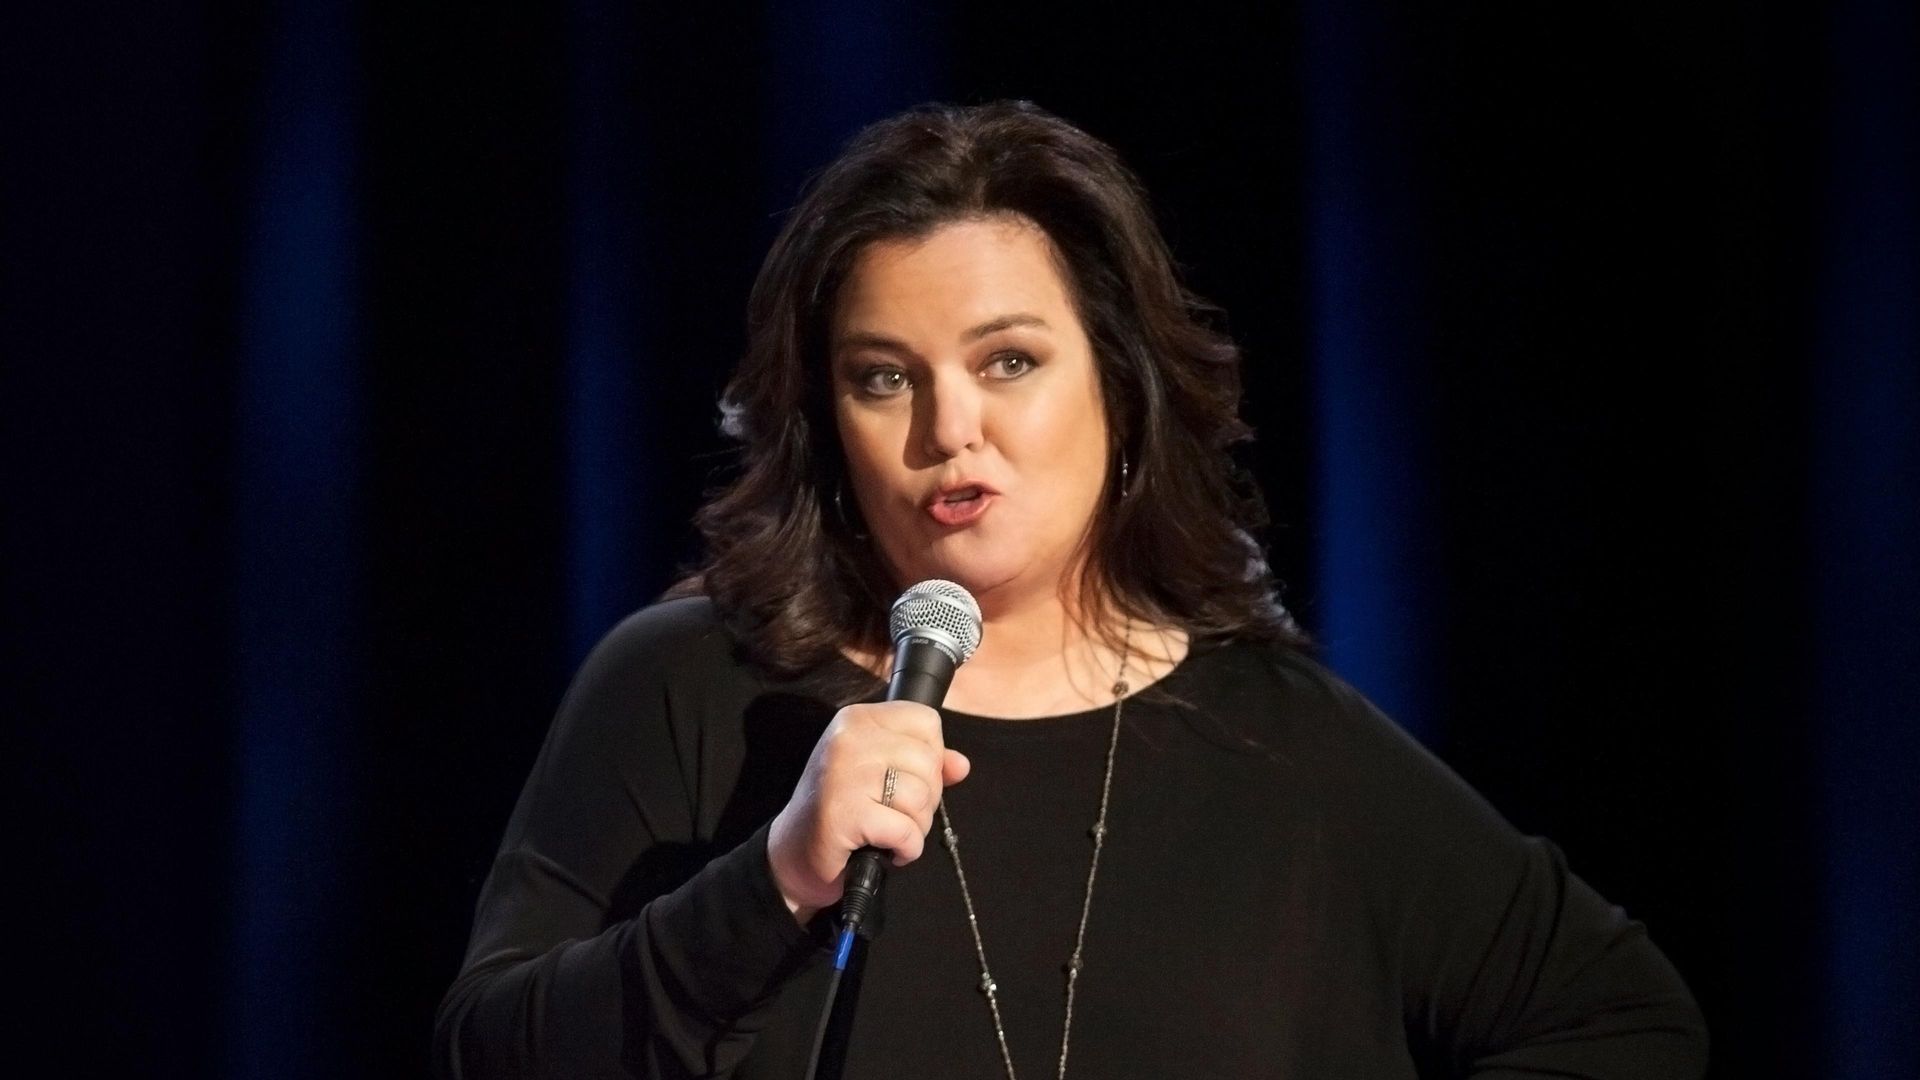 Rosie O'Donnell: A Heartfelt Stand Up Backdrop